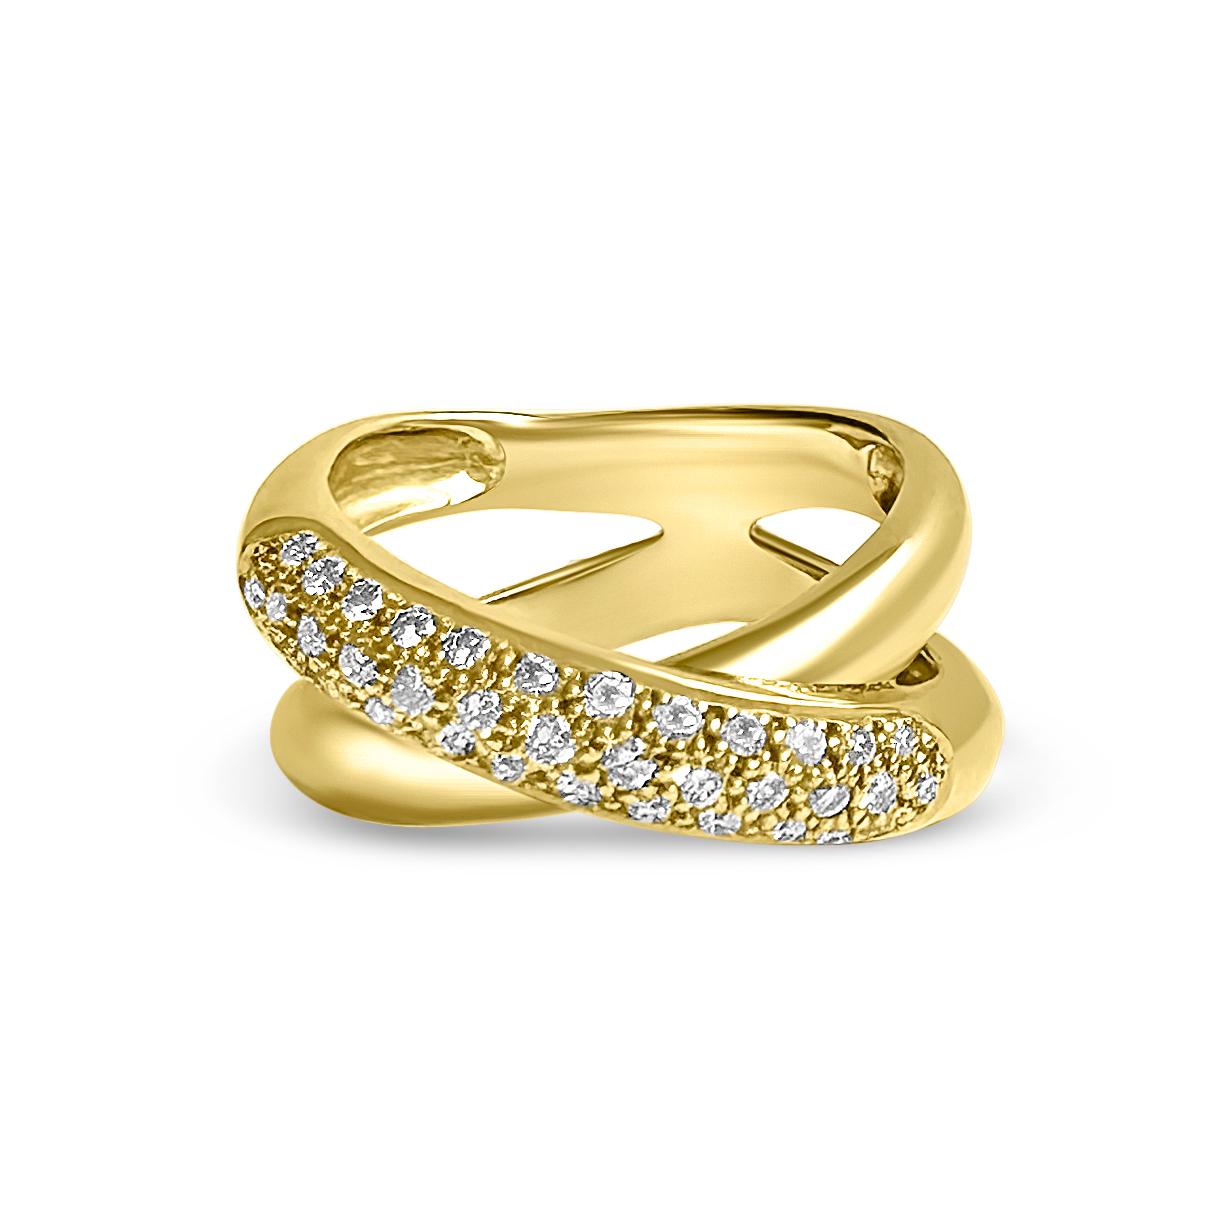 14KY Ring with 37 Round 1.4mm Diamonds 0.50ct G-H VS

Embrace radiance with the 14K Yellow Gold Ring by Manart Gold & Diamond Jewelry. The classic 